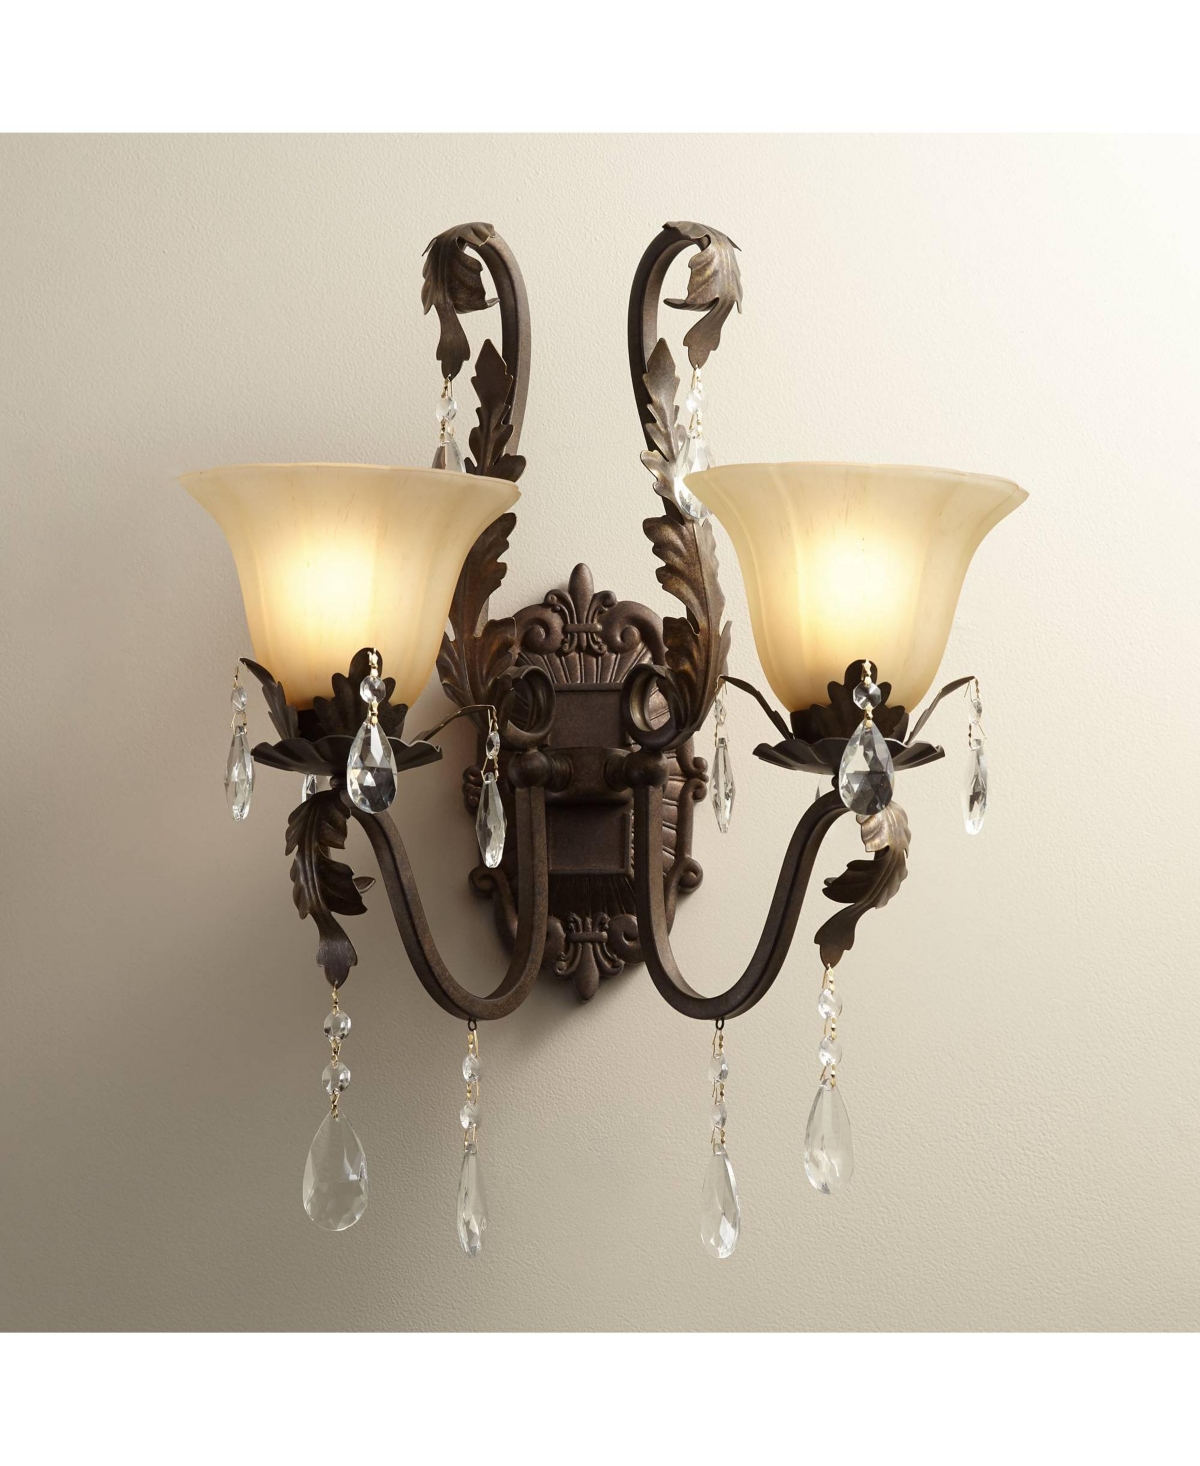 Regency Hill Iron Leaf Wall Sconce Lighting Roman Bronze Hardwired 21.5" High 2-light Fixture Crystal Scroll Arms In Brown